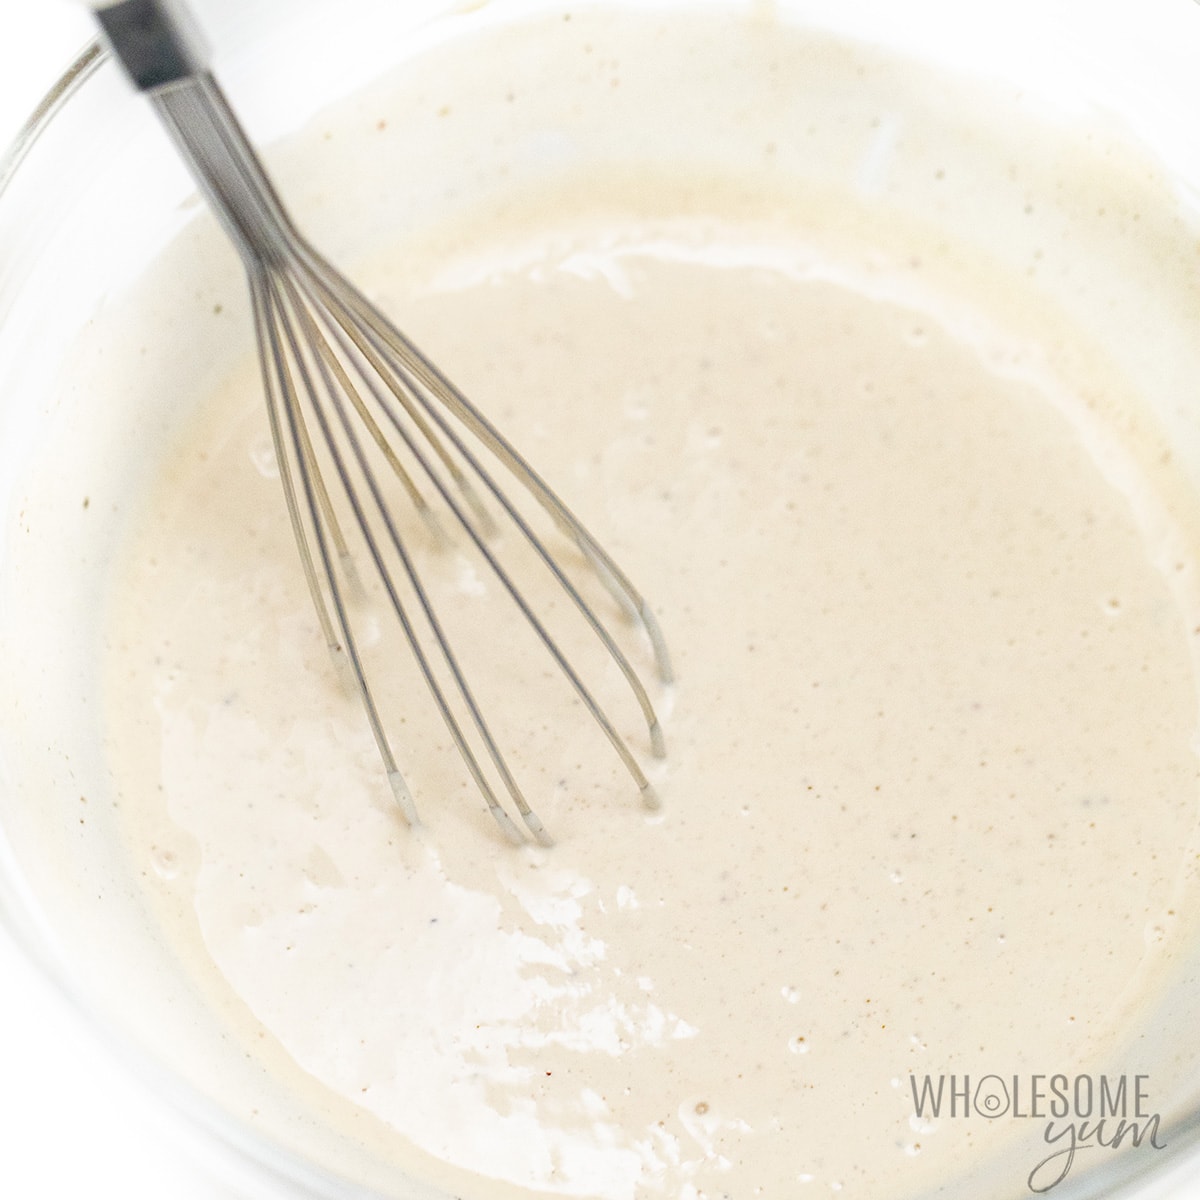 Caesar salad dressing recipe ingredients whisked together in a bowl.